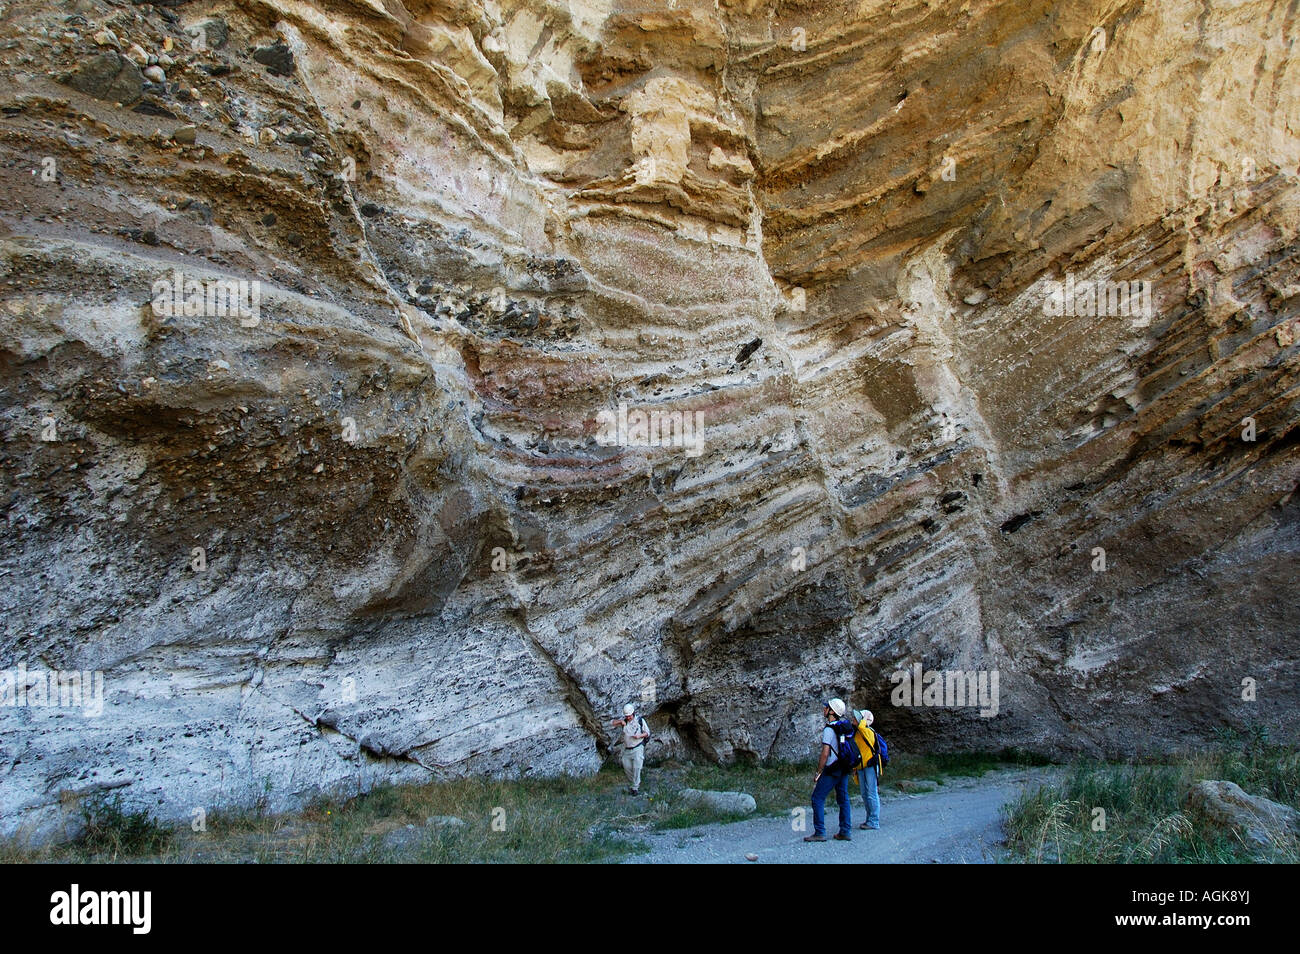 Geologists observe the faulted sedimentary rocks in southern Spain. Stock Photo